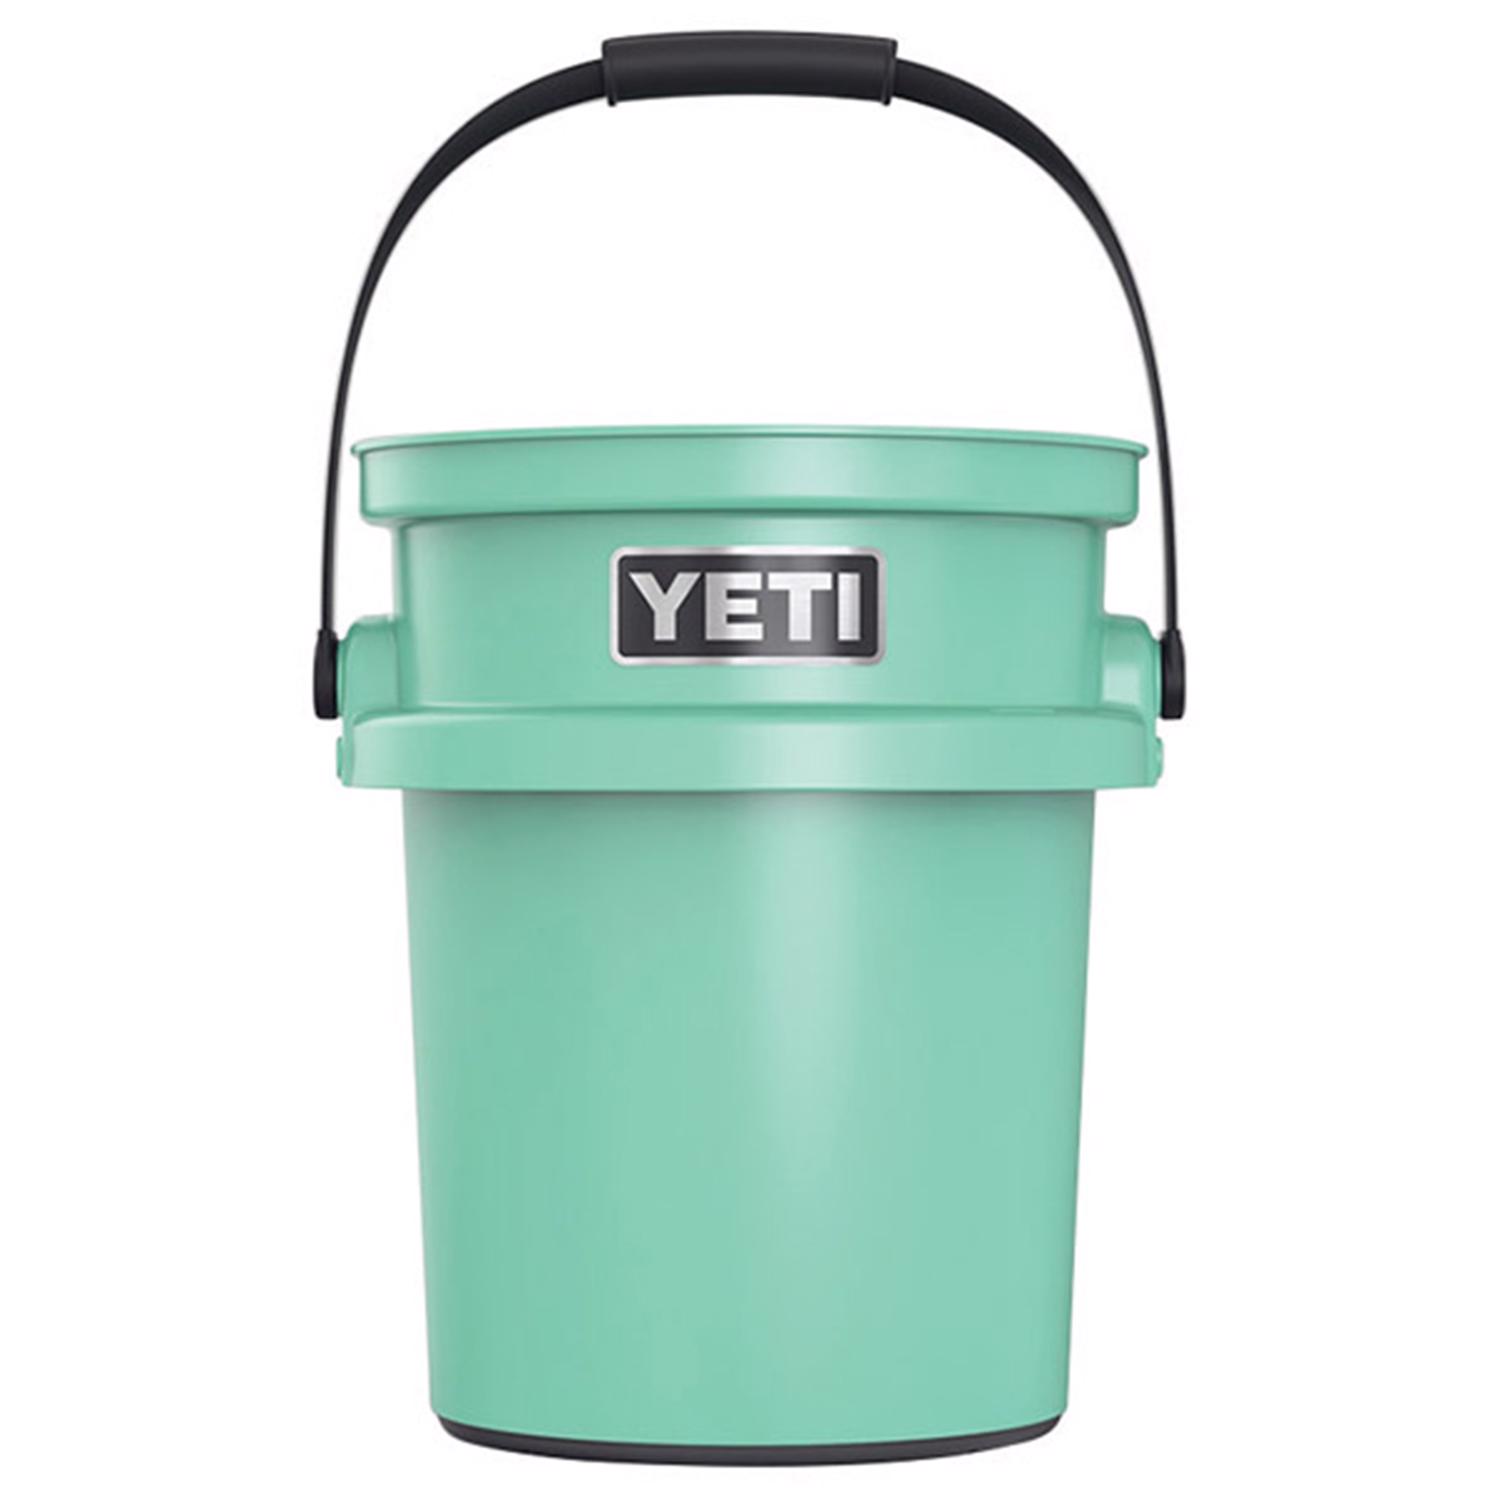 Ace of Gray on X: The LoadOut Bucket Special is still going on! Get a Yeti  LoadOut 5Gal Bucket of your choice, a Utility Gear Belt, a LoadOut Caddy,  and a Honey